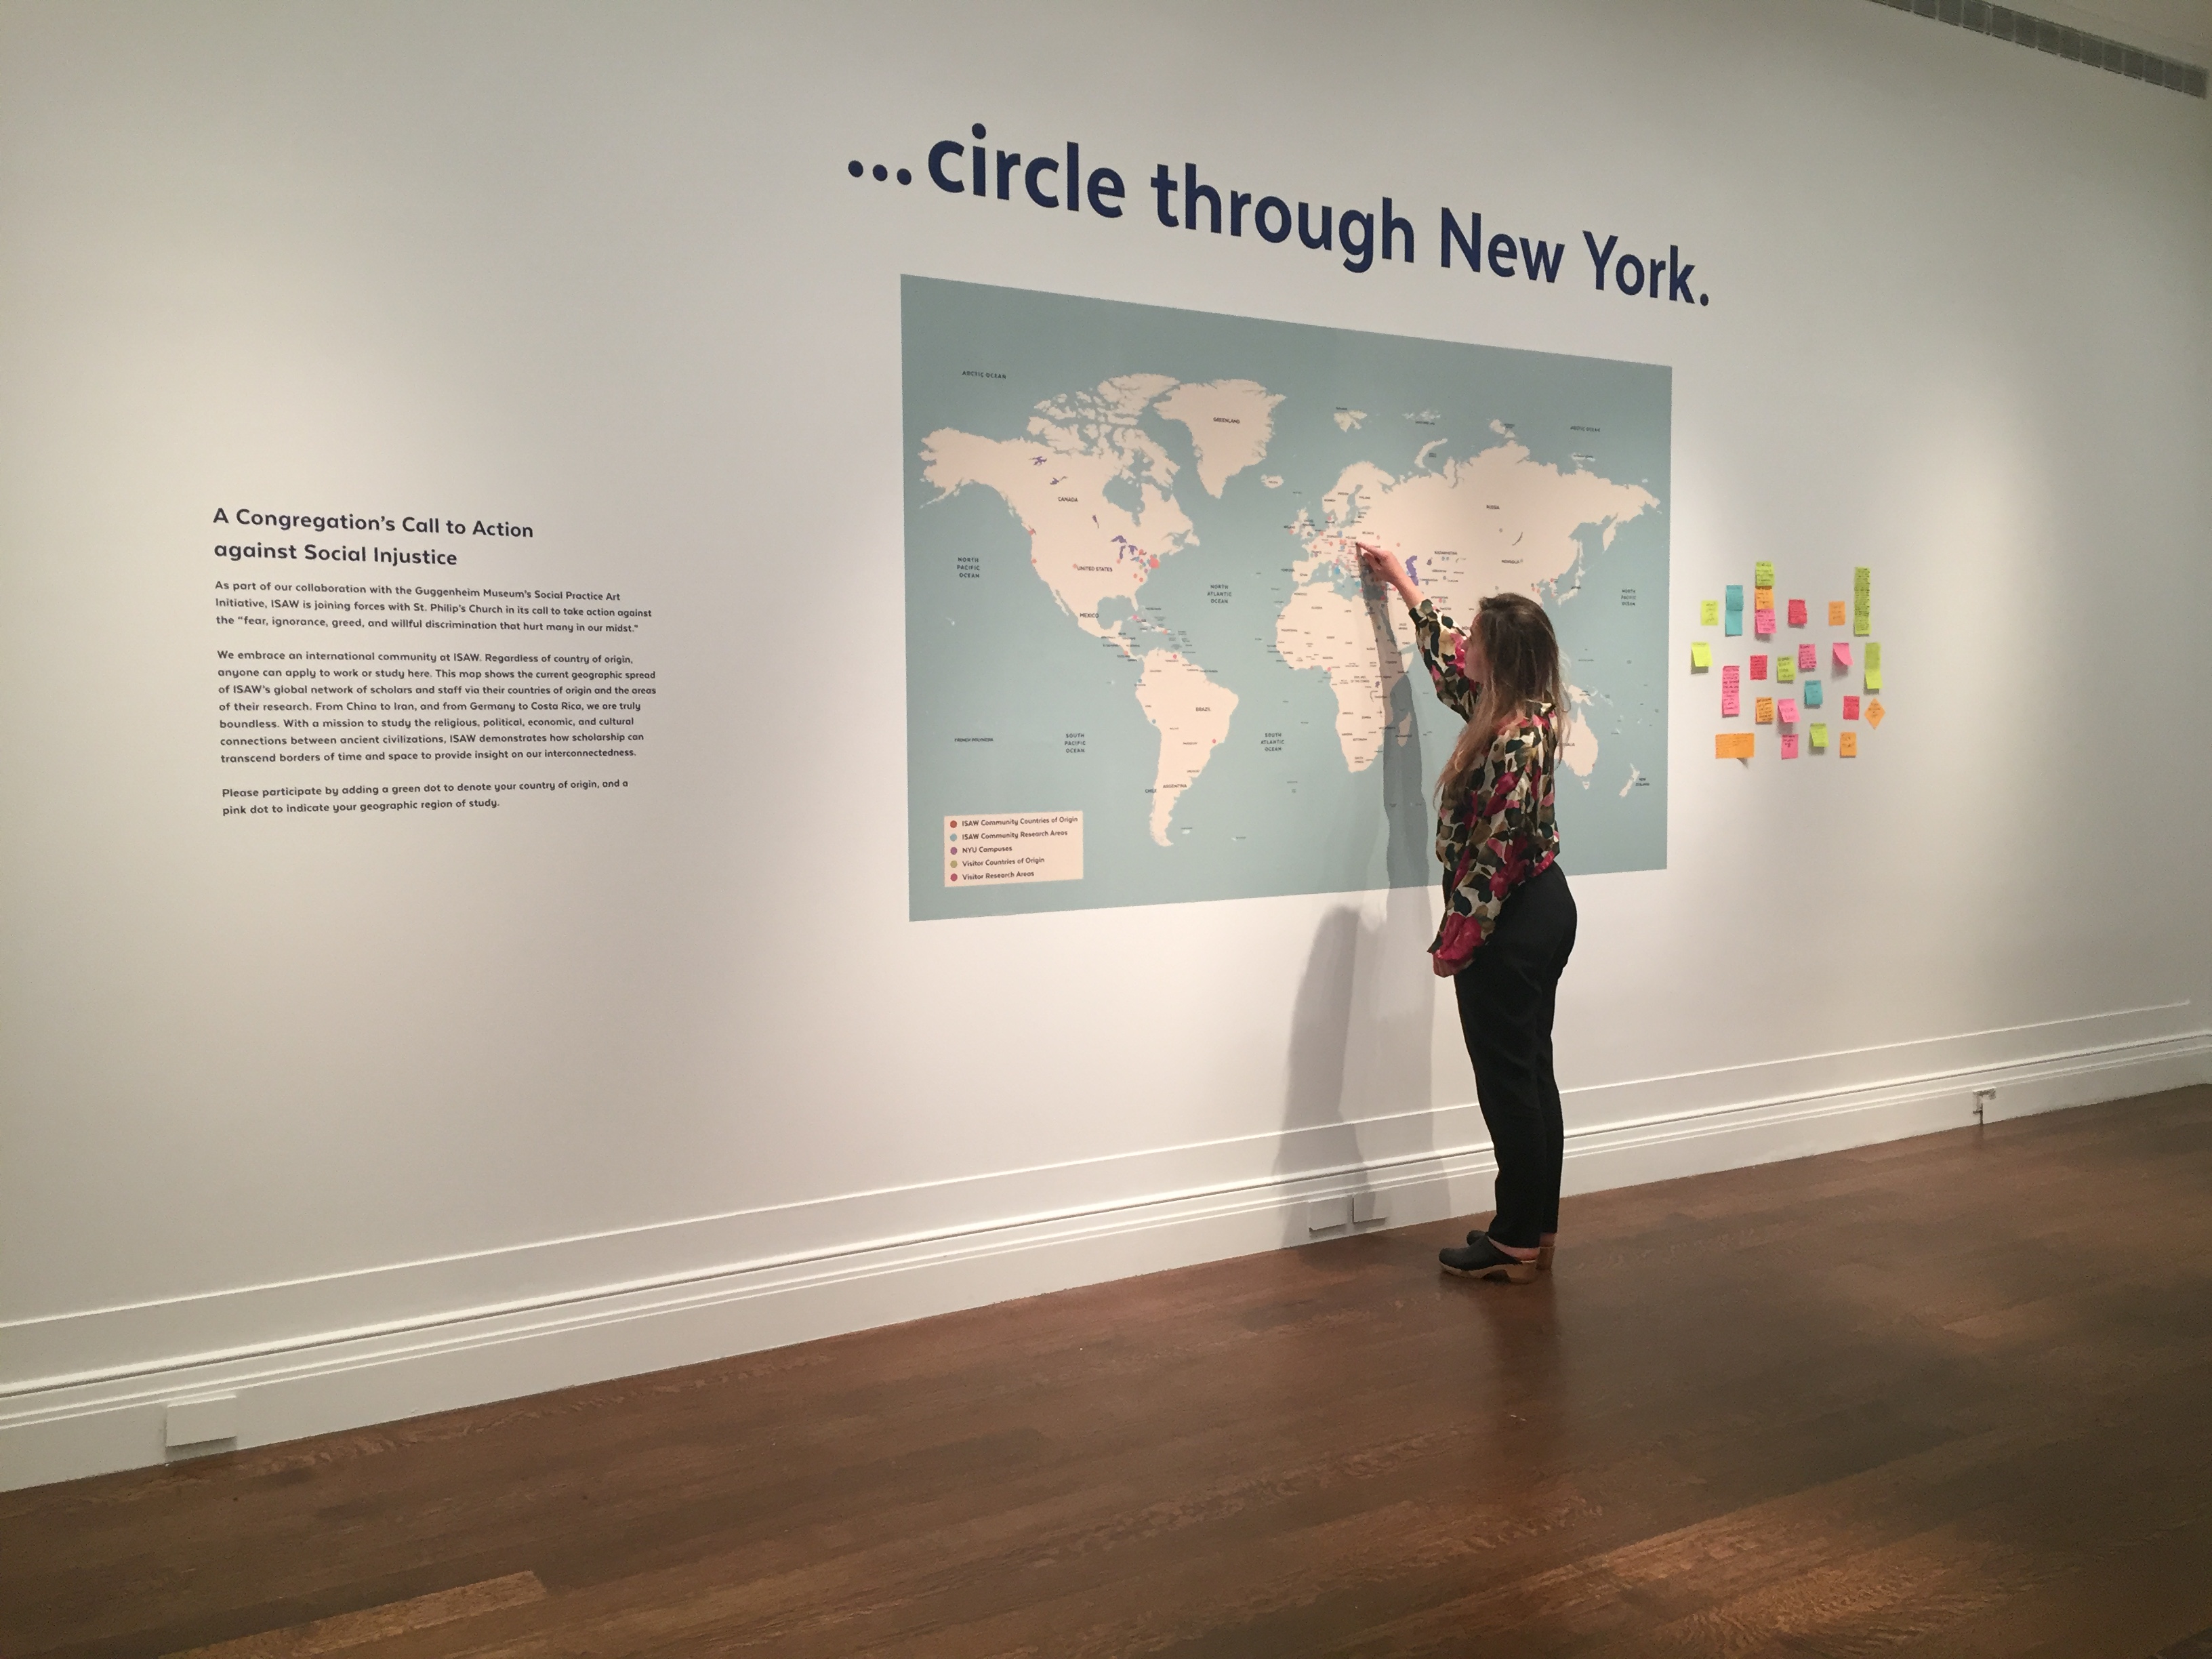 ". . . circle through New York" Continues. ISAW and St. Philip’s Church Invite You in a Call to Action! 